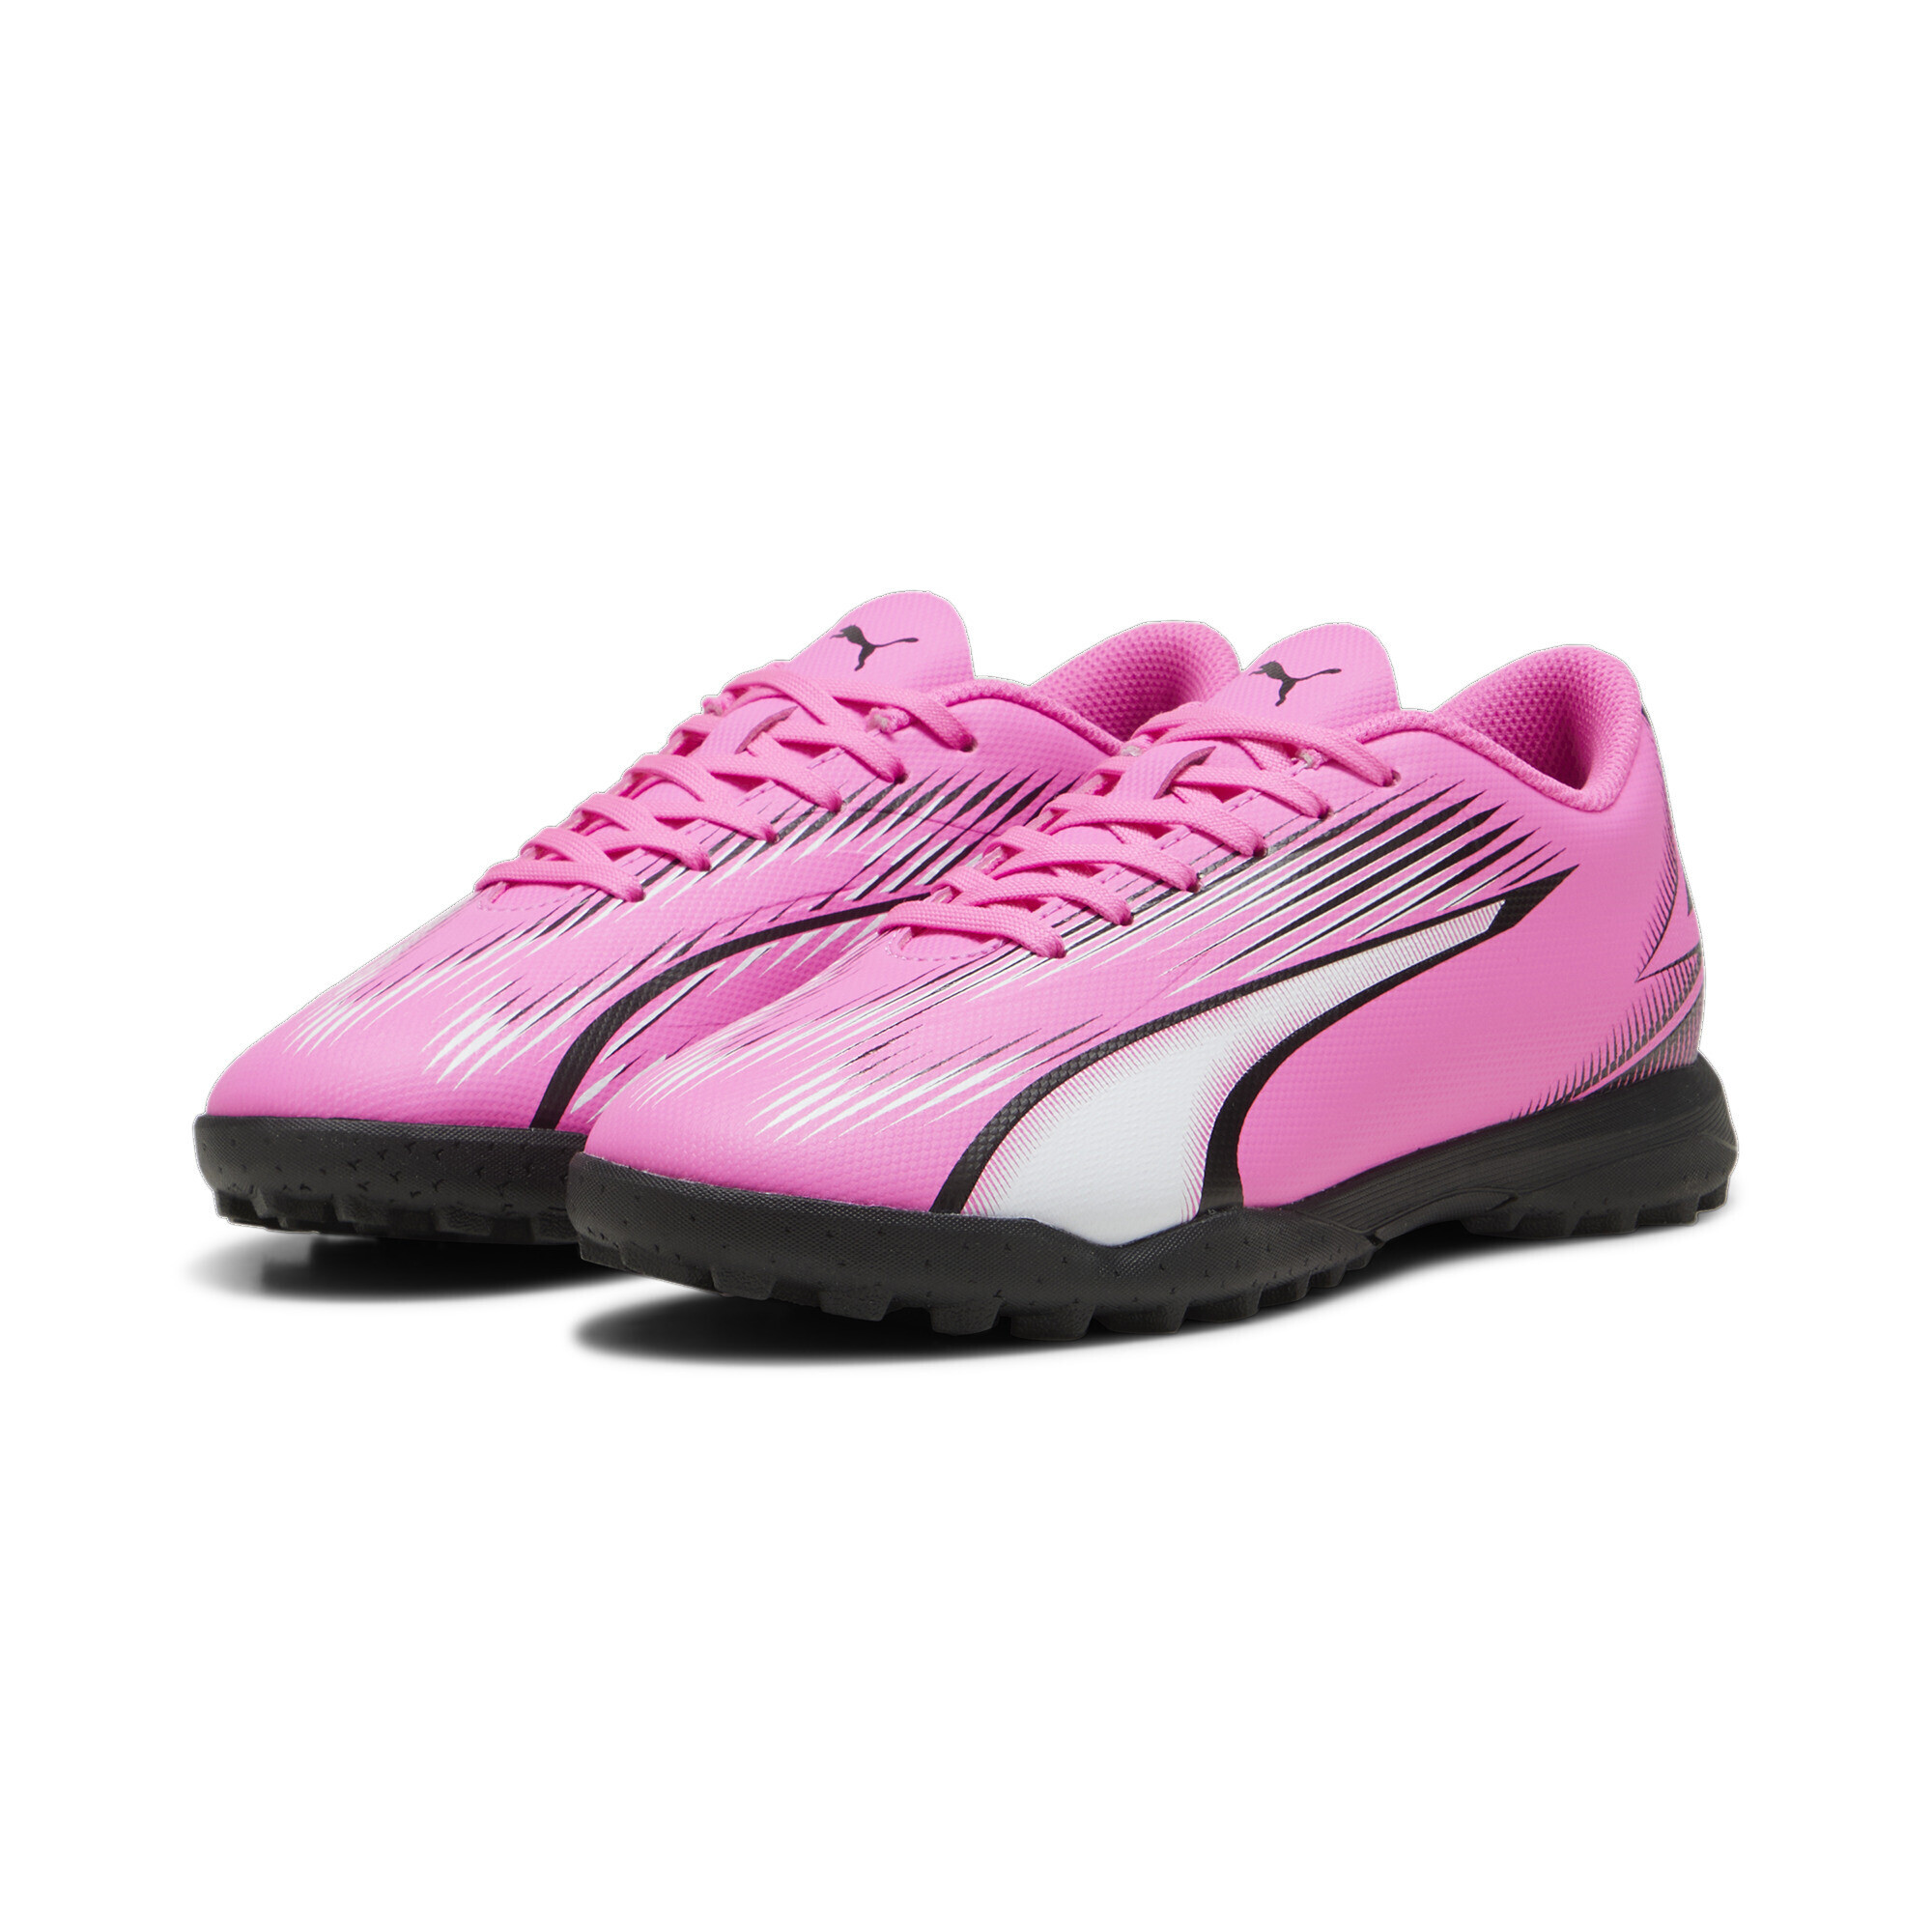 PUMA ULTRA PLAY TT Youth Football Boots In Pink, Size EU 35.5